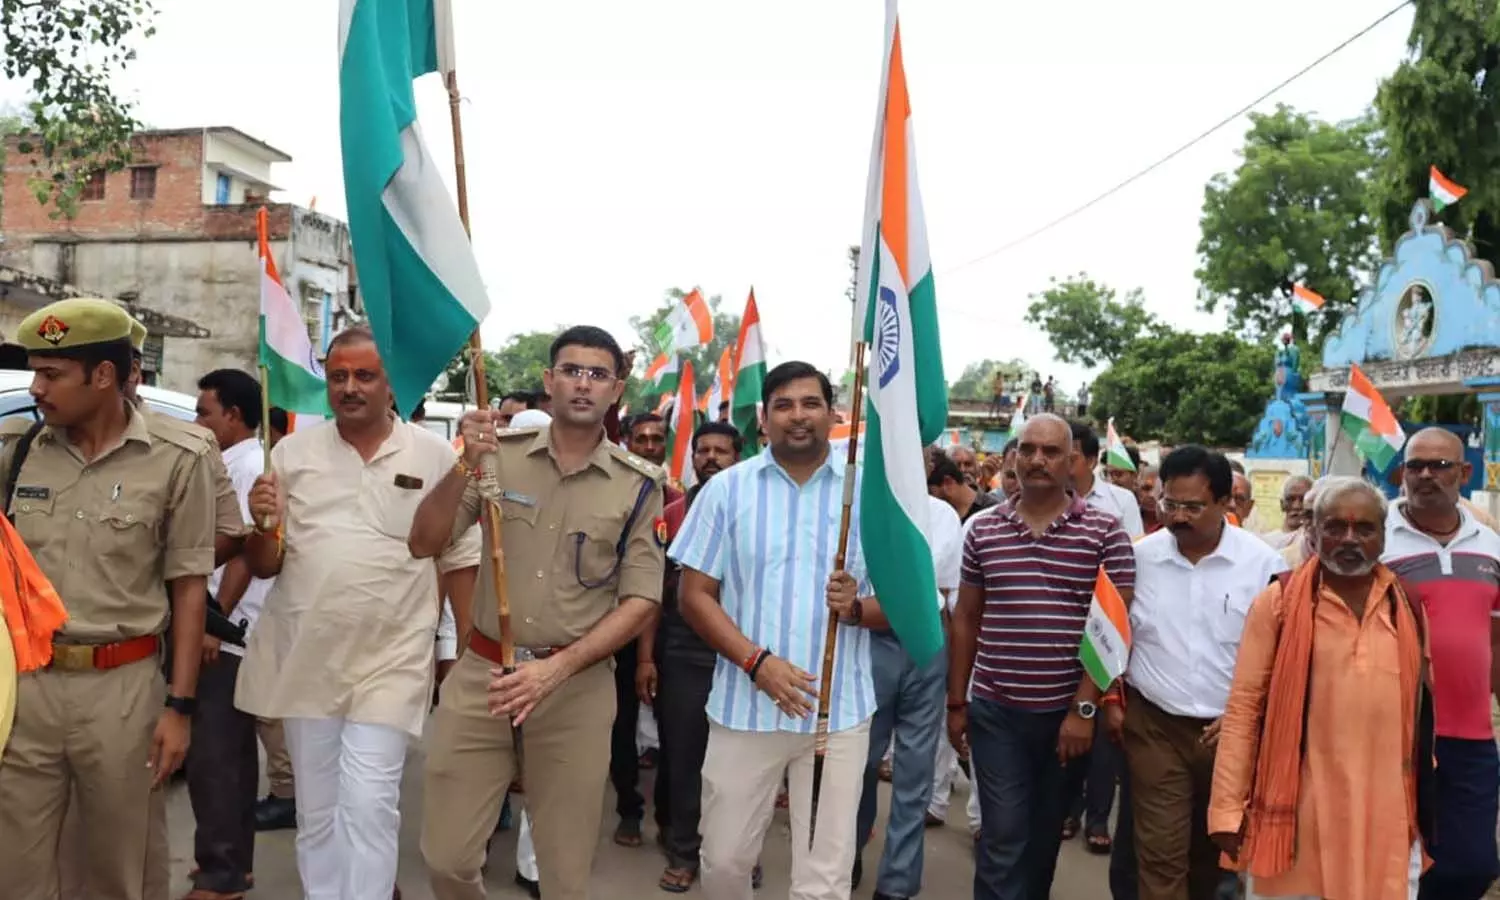 The tricolor yatra was taken out with a bandwagon in Chitrakoot, the city resonated with the chants of Mother India